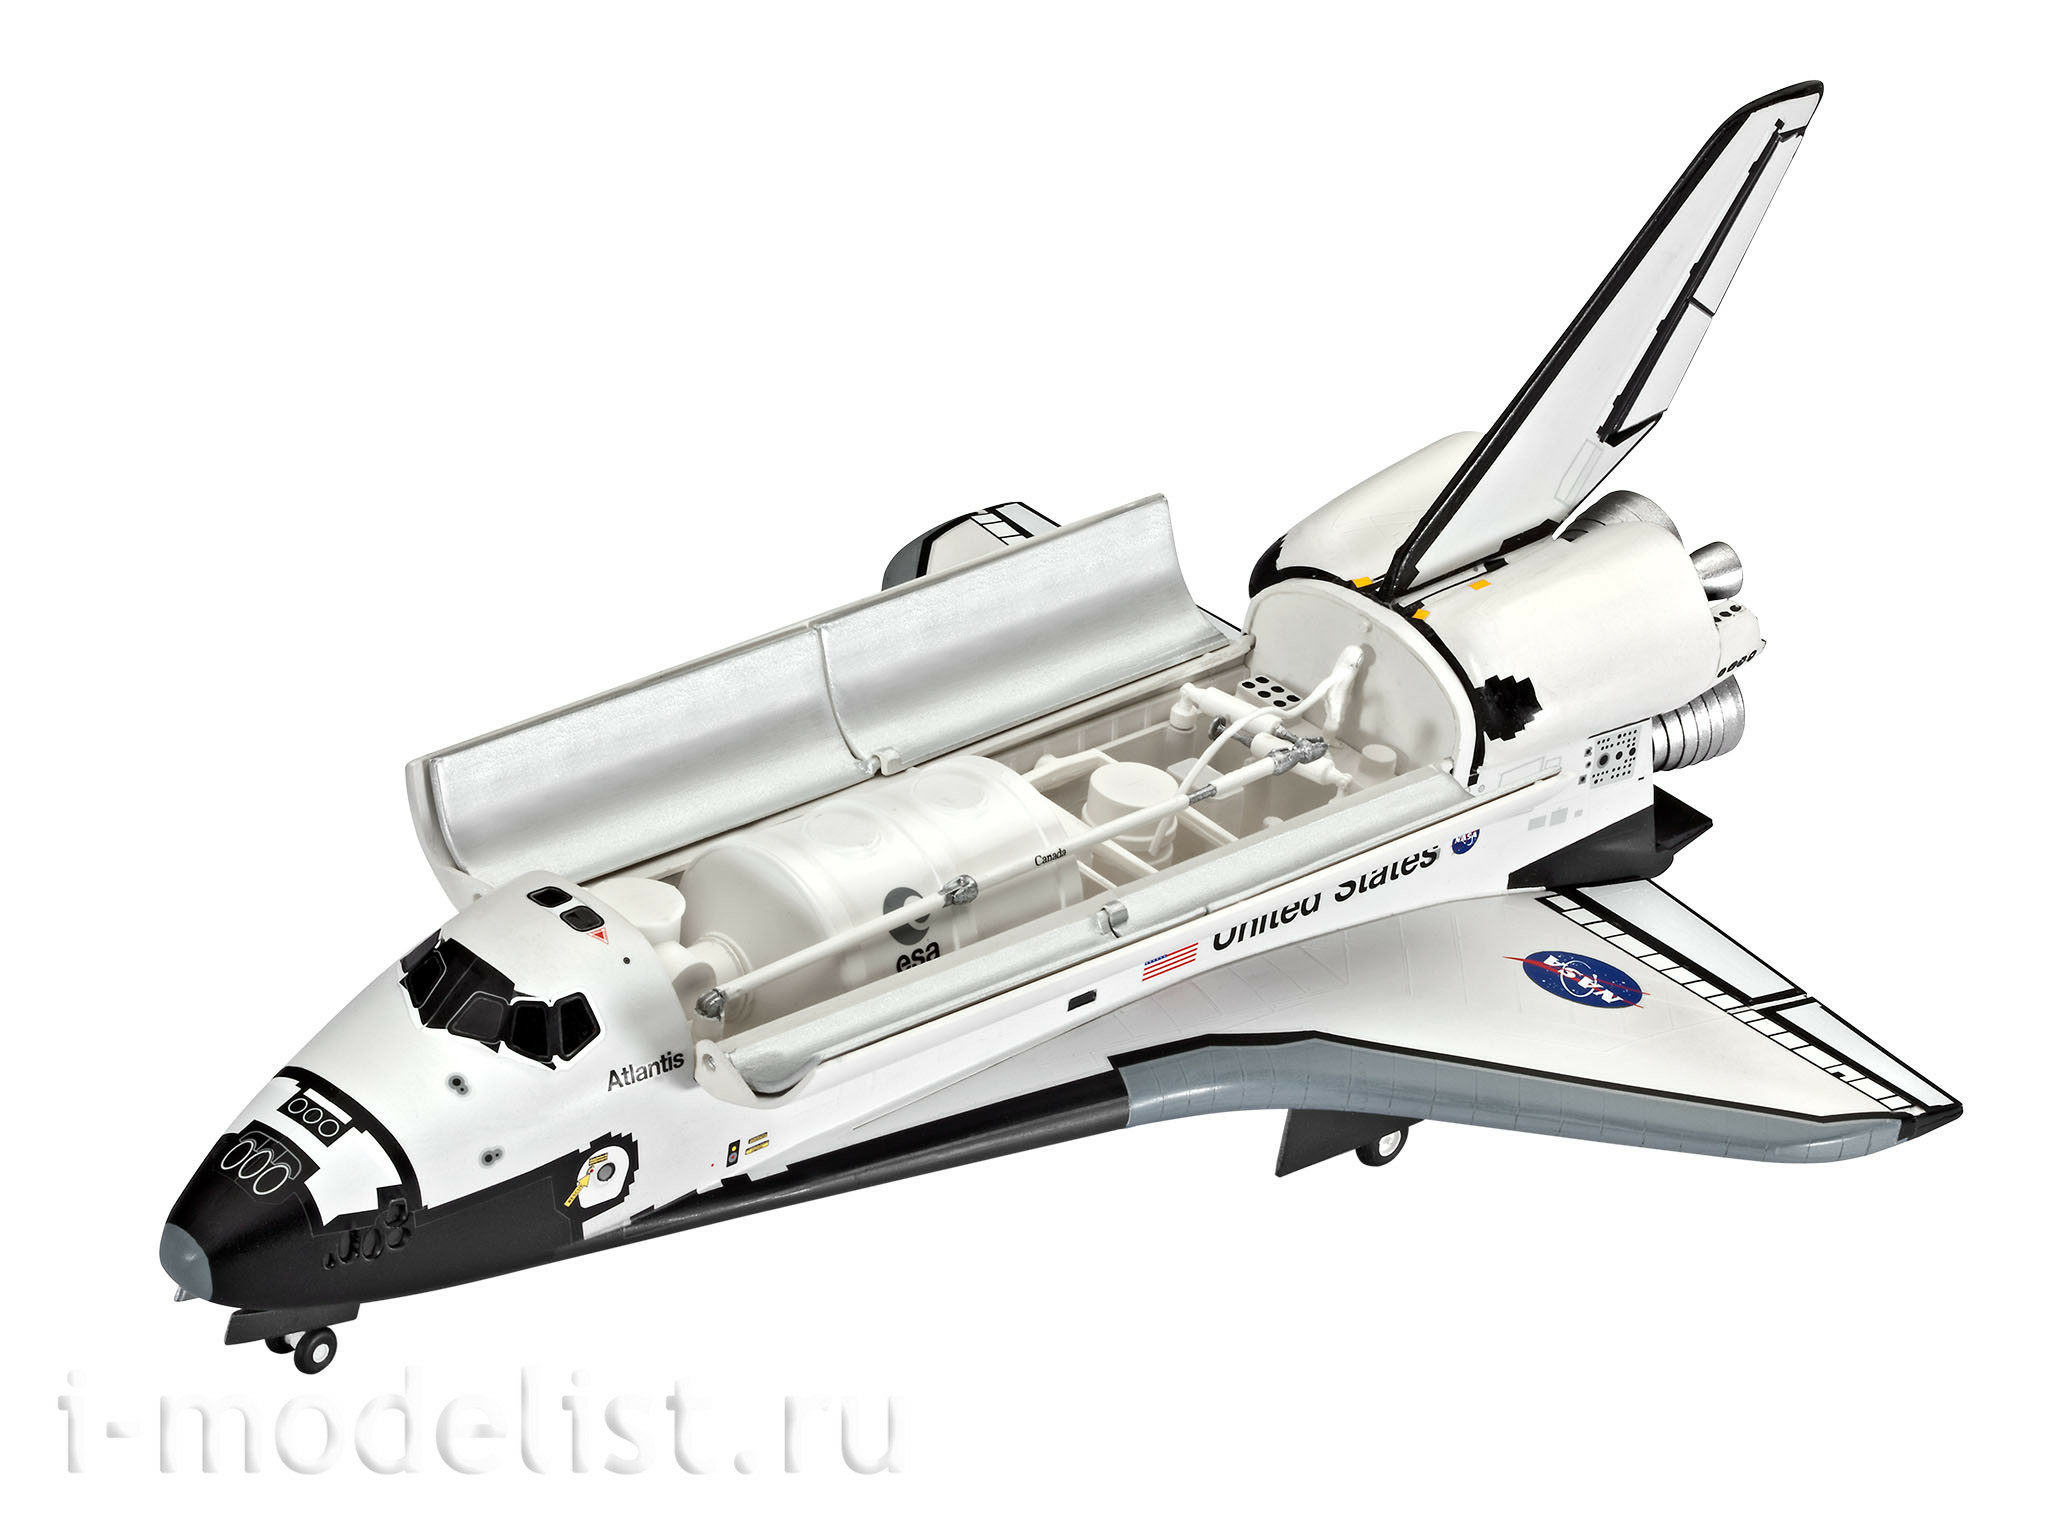 Revell 04544 1/144 scales Space ship Atlantis